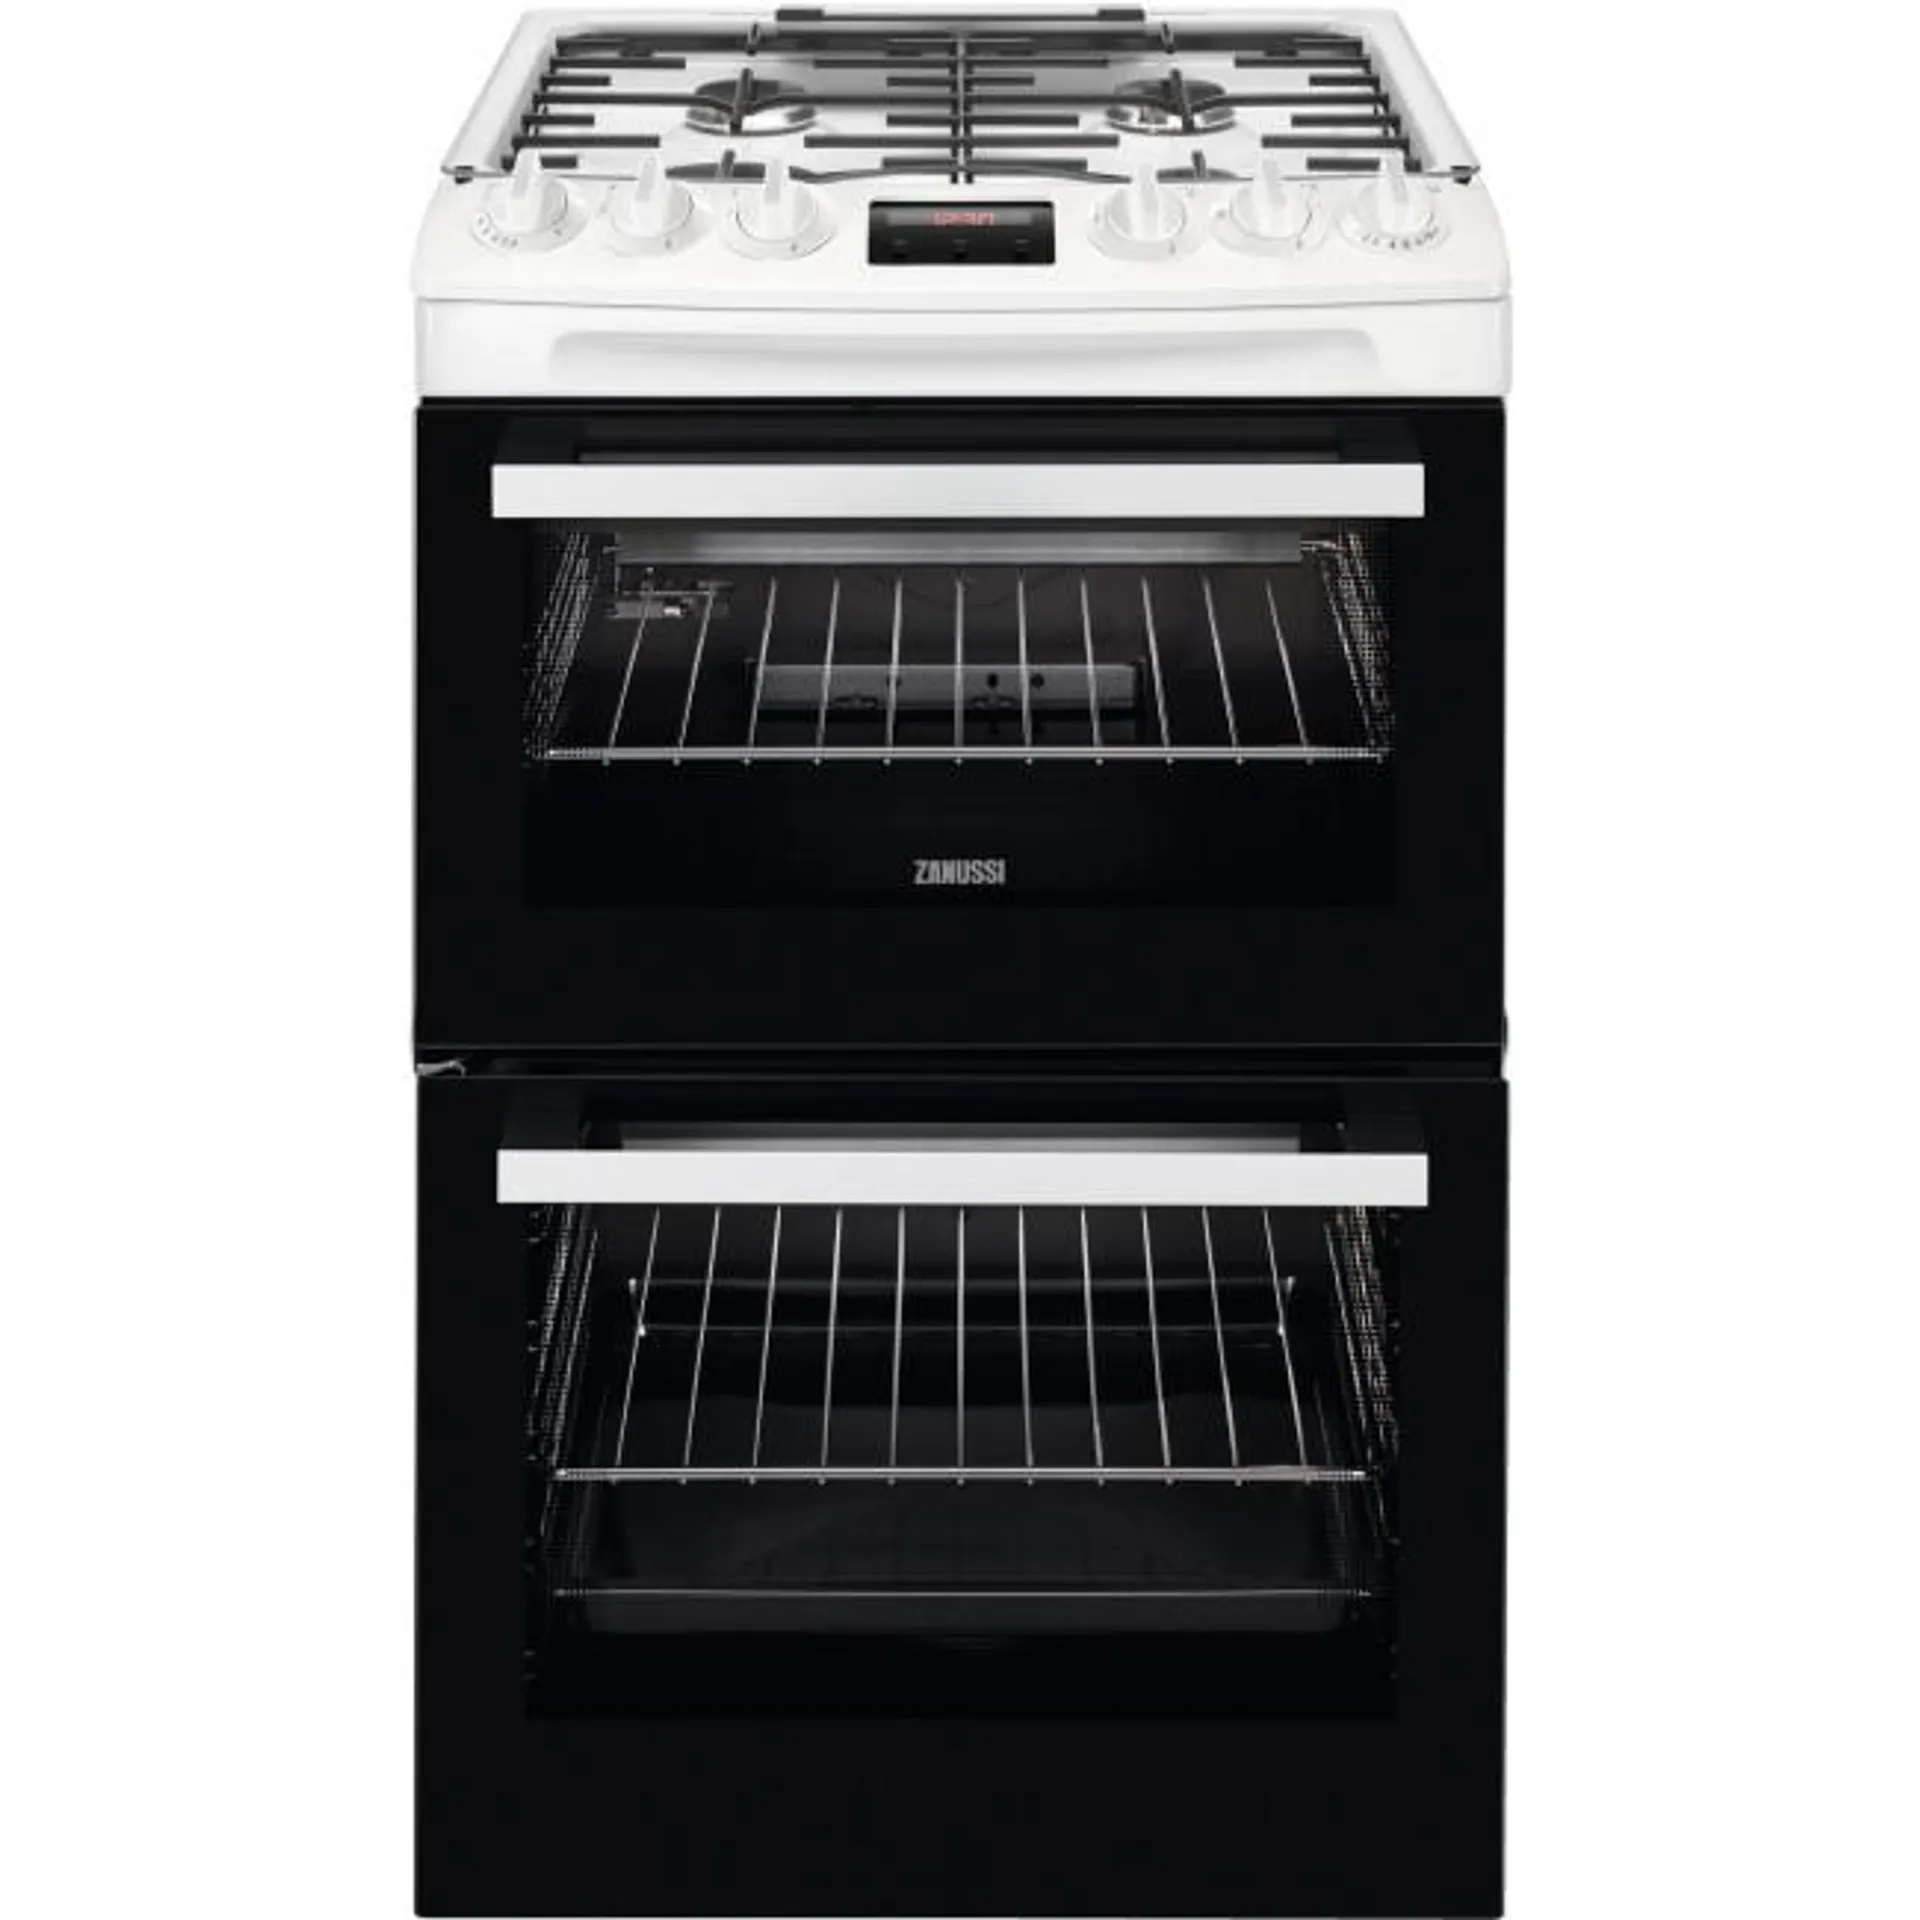 Zanussi 55cm Double Oven Gas Cooker with Catalytic Liners - White